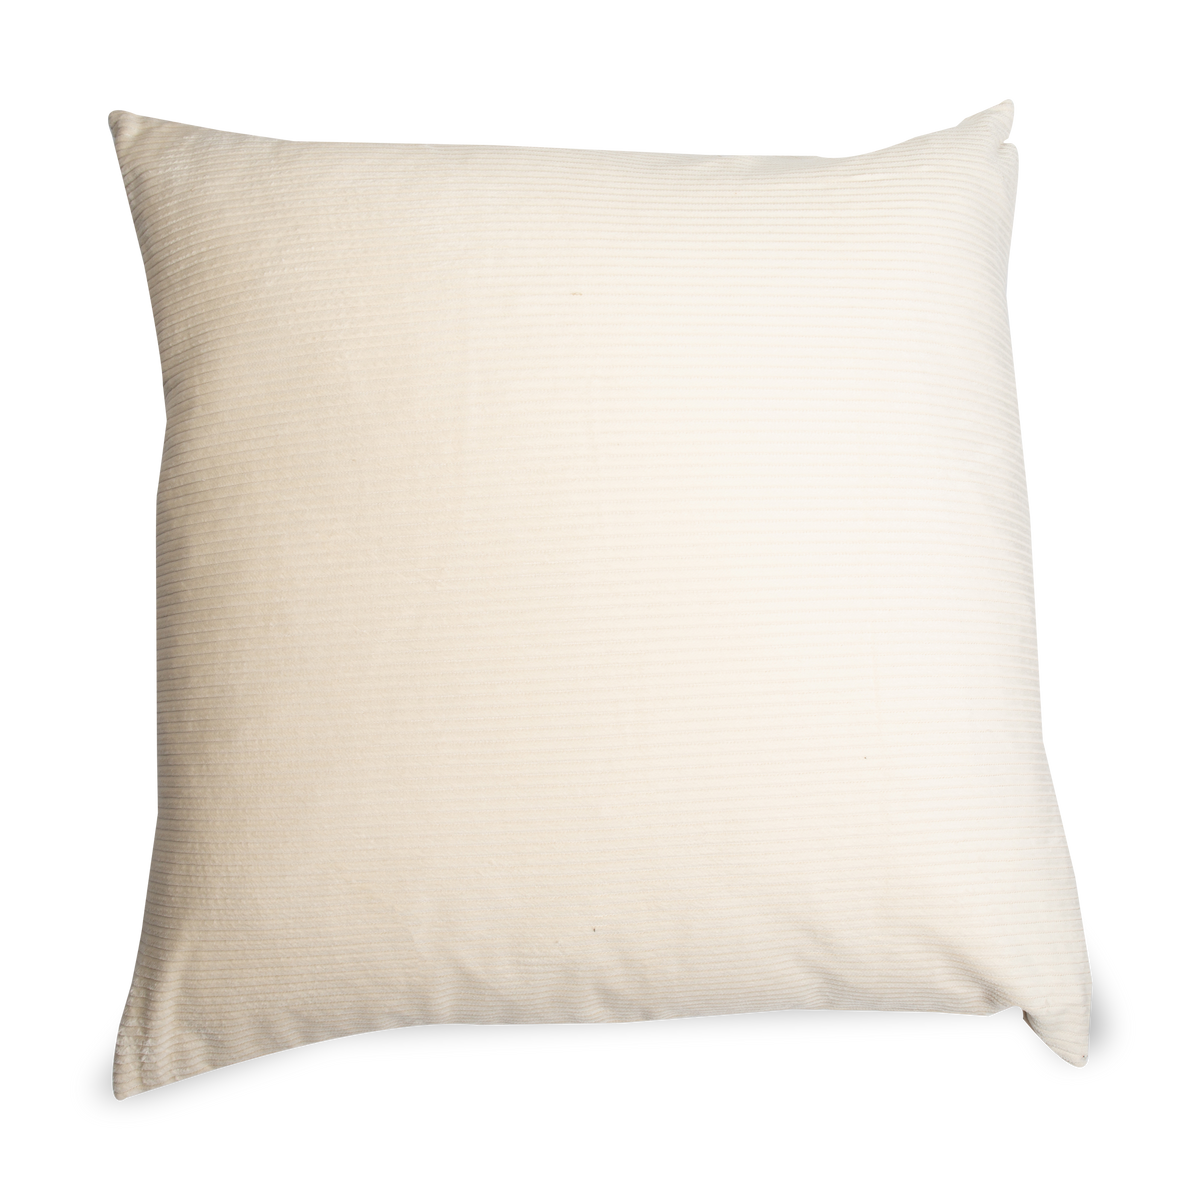 The Corduroy Pillow in white is texturally significant.